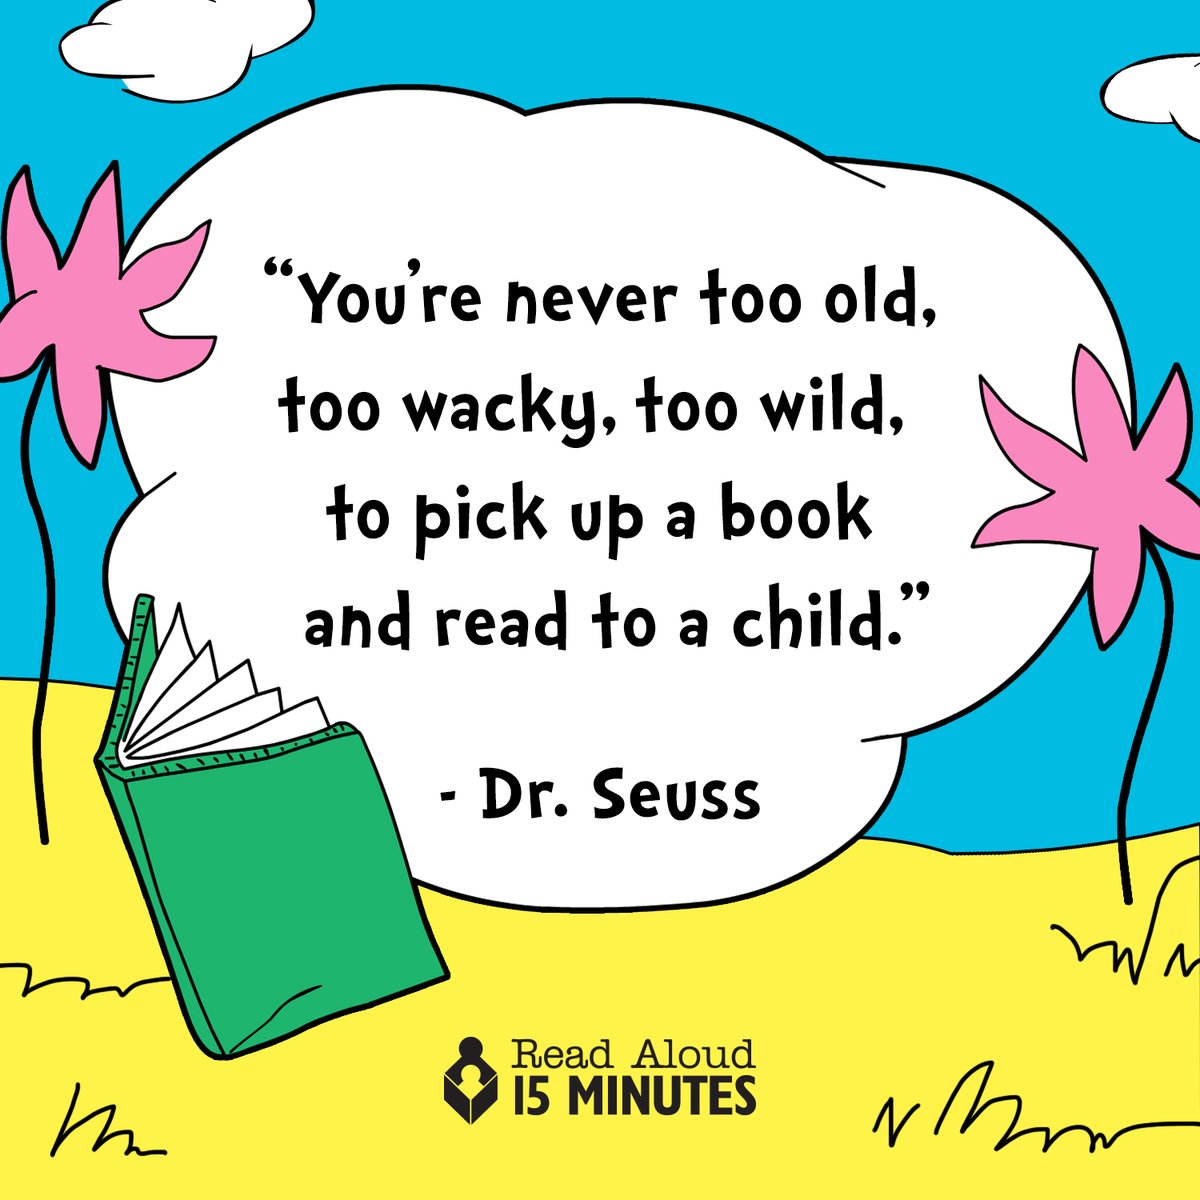 Happy National Read a Book Day! #ReadAloud15